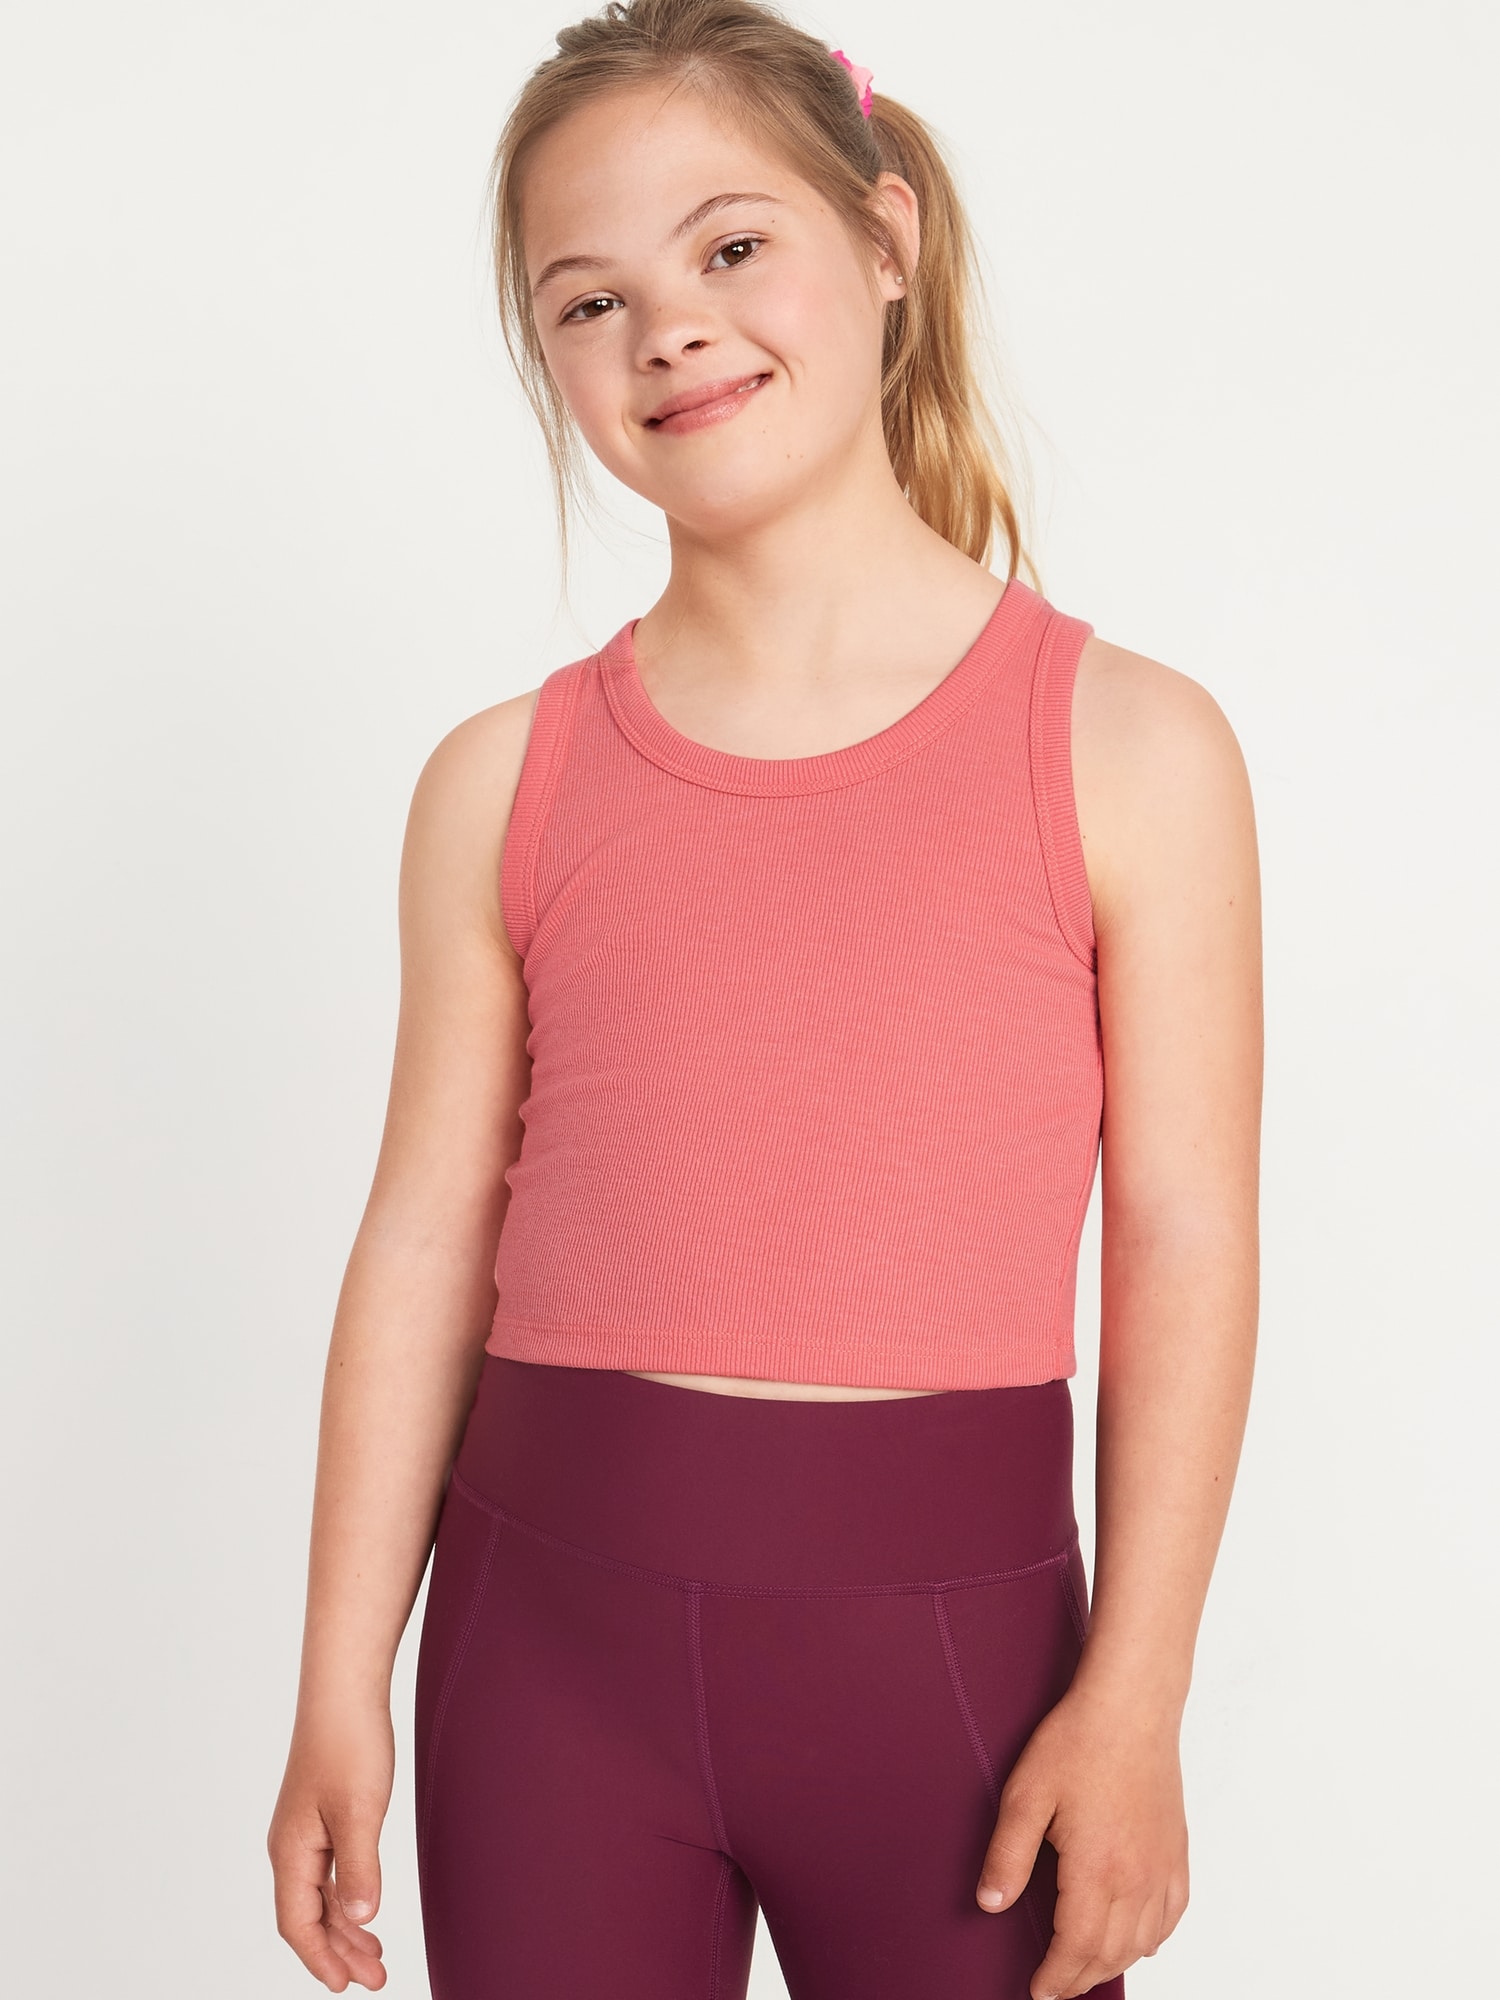 Old Navy Cropped UltraLite Rib-Knit Performance Tank for Girls red. 1